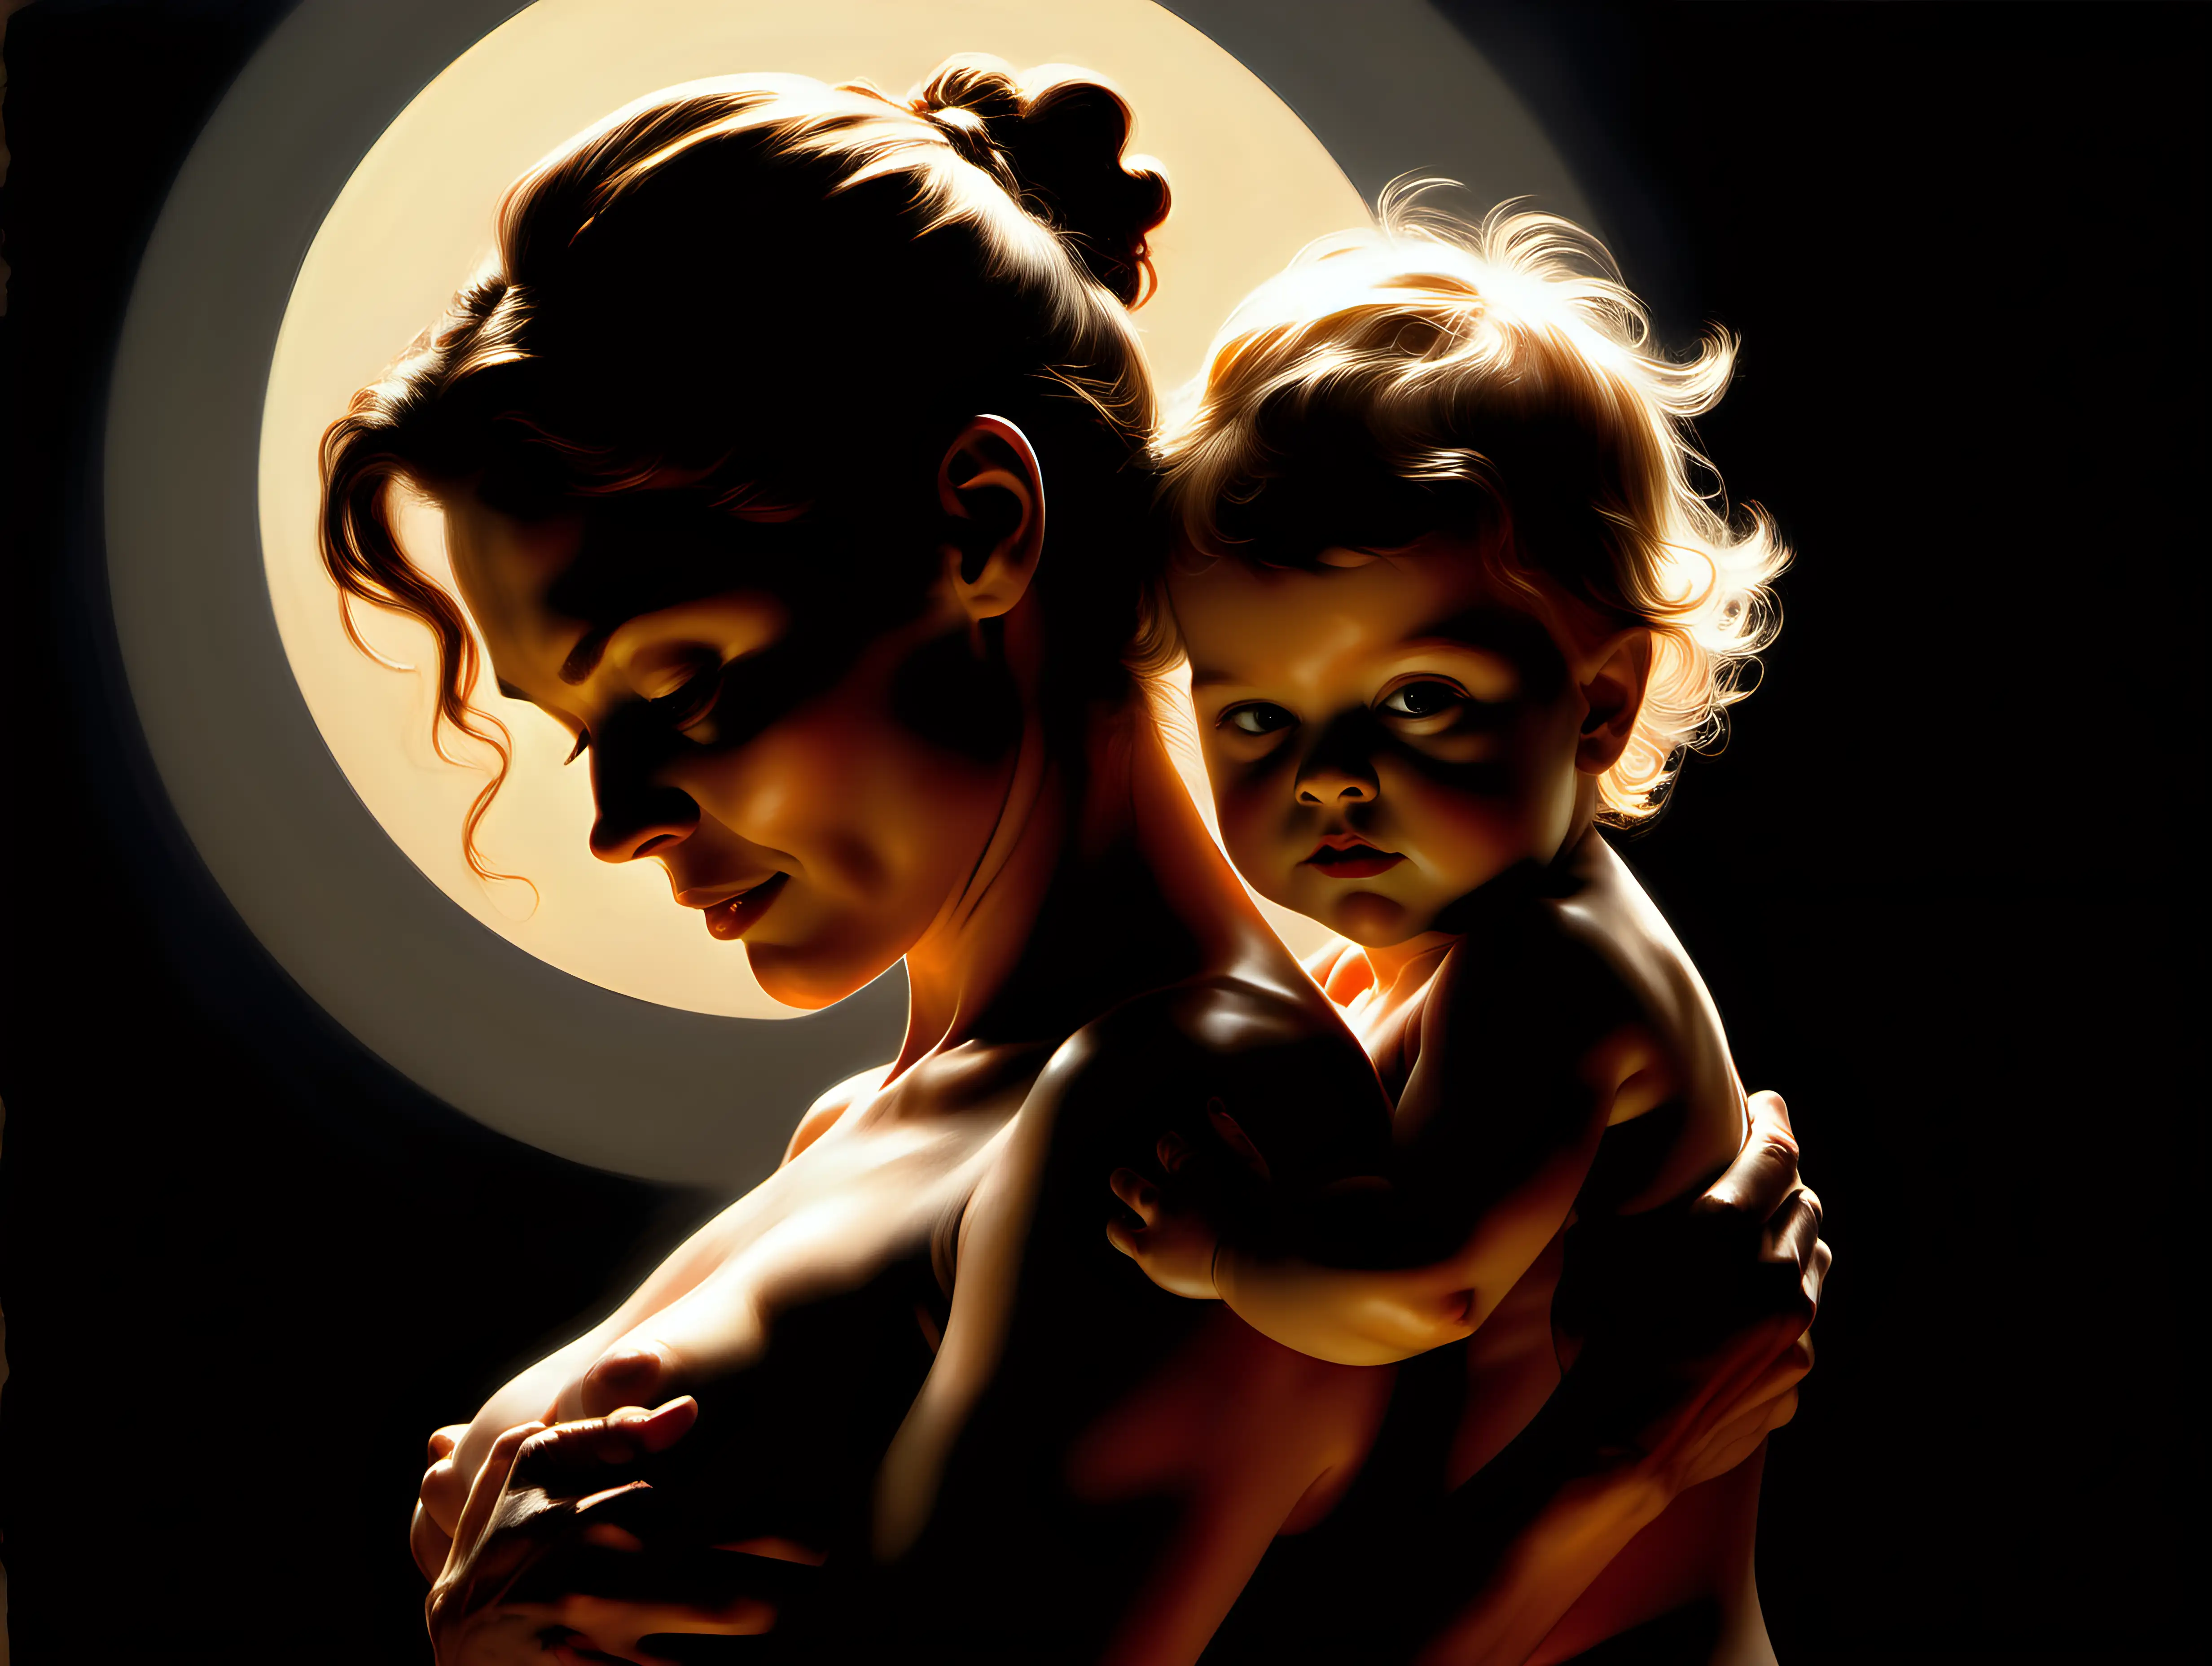 Mother and child holding each other with sun coming in behind them in style of photorealism by frank frazetta, photograph, high detail, elegant, close up and dark background